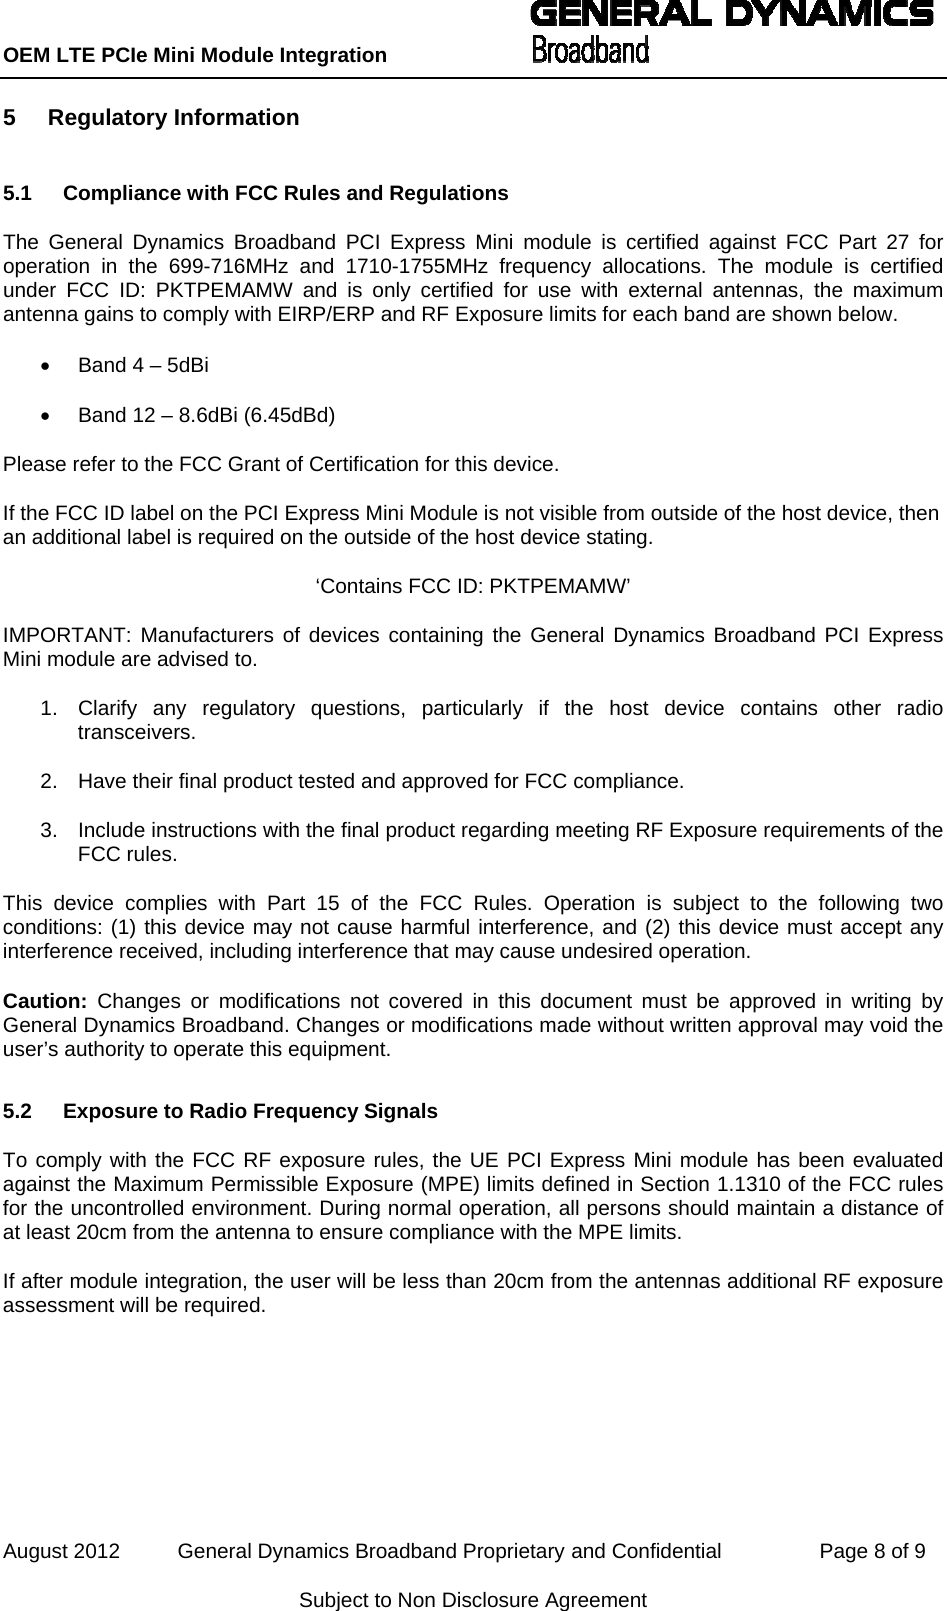 OEM LTE PCIe Mini Module Integration           August 2012          General Dynamics Broadband Proprietary and Confidential                 Page 8 of 9 Subject to Non Disclosure Agreement 5 Regulatory Information 5.1  Compliance with FCC Rules and Regulations The General Dynamics Broadband PCI Express Mini module is certified against FCC Part 27 for operation in the 699-716MHz and 1710-1755MHz frequency allocations. The module is certified under FCC ID: PKTPEMAMW and is only certified for use with external antennas, the maximum antenna gains to comply with EIRP/ERP and RF Exposure limits for each band are shown below. •  Band 4 – 5dBi •  Band 12 – 8.6dBi (6.45dBd) Please refer to the FCC Grant of Certification for this device. If the FCC ID label on the PCI Express Mini Module is not visible from outside of the host device, then an additional label is required on the outside of the host device stating. ‘Contains FCC ID: PKTPEMAMW’ IMPORTANT: Manufacturers of devices containing the General Dynamics Broadband PCI Express Mini module are advised to. 1.  Clarify any regulatory questions, particularly if the host device contains other radio transceivers. 2.  Have their final product tested and approved for FCC compliance. 3.  Include instructions with the final product regarding meeting RF Exposure requirements of the FCC rules. This device complies with Part 15 of the FCC Rules. Operation is subject to the following two conditions: (1) this device may not cause harmful interference, and (2) this device must accept any interference received, including interference that may cause undesired operation. Caution: Changes or modifications not covered in this document must be approved in writing by General Dynamics Broadband. Changes or modifications made without written approval may void the user’s authority to operate this equipment. 5.2  Exposure to Radio Frequency Signals To comply with the FCC RF exposure rules, the UE PCI Express Mini module has been evaluated against the Maximum Permissible Exposure (MPE) limits defined in Section 1.1310 of the FCC rules for the uncontrolled environment. During normal operation, all persons should maintain a distance of at least 20cm from the antenna to ensure compliance with the MPE limits. If after module integration, the user will be less than 20cm from the antennas additional RF exposure assessment will be required. 